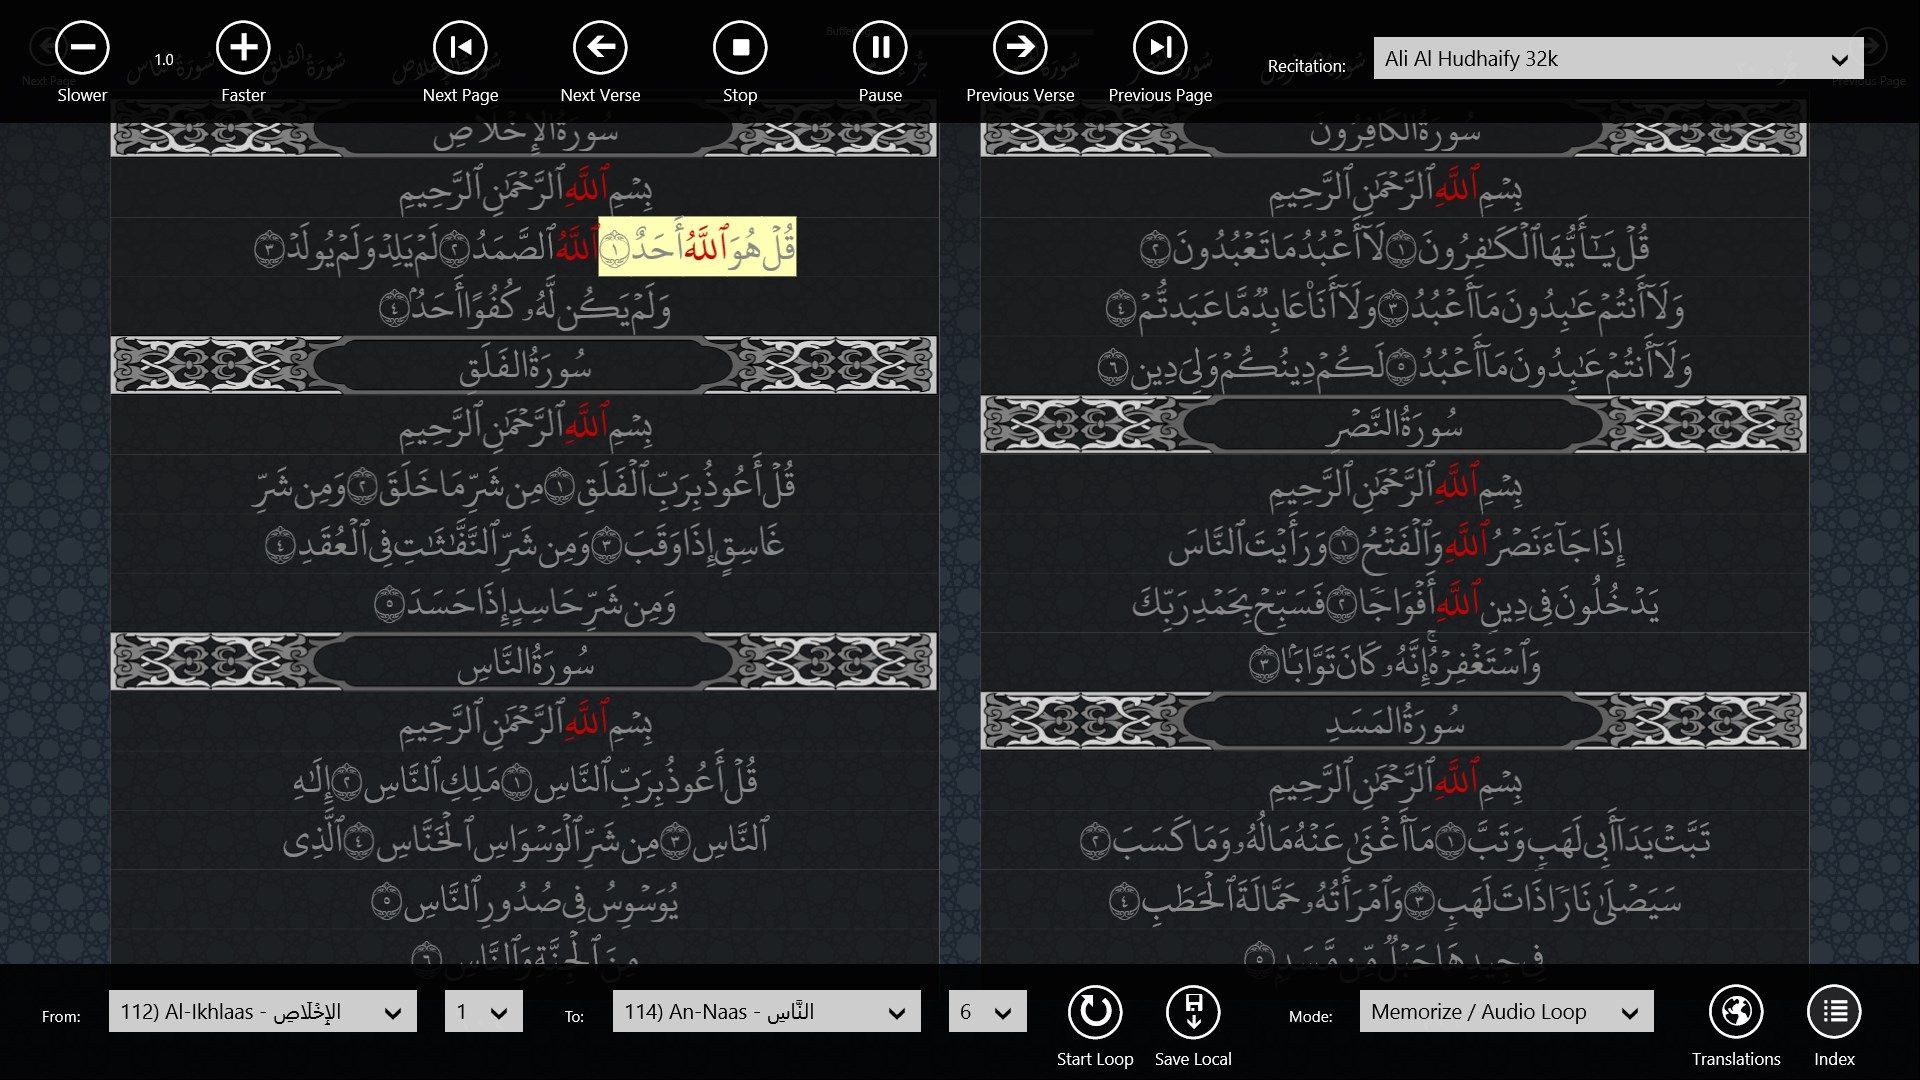 Listen to Recitations of the Quran with highlights and loop verses to memorize